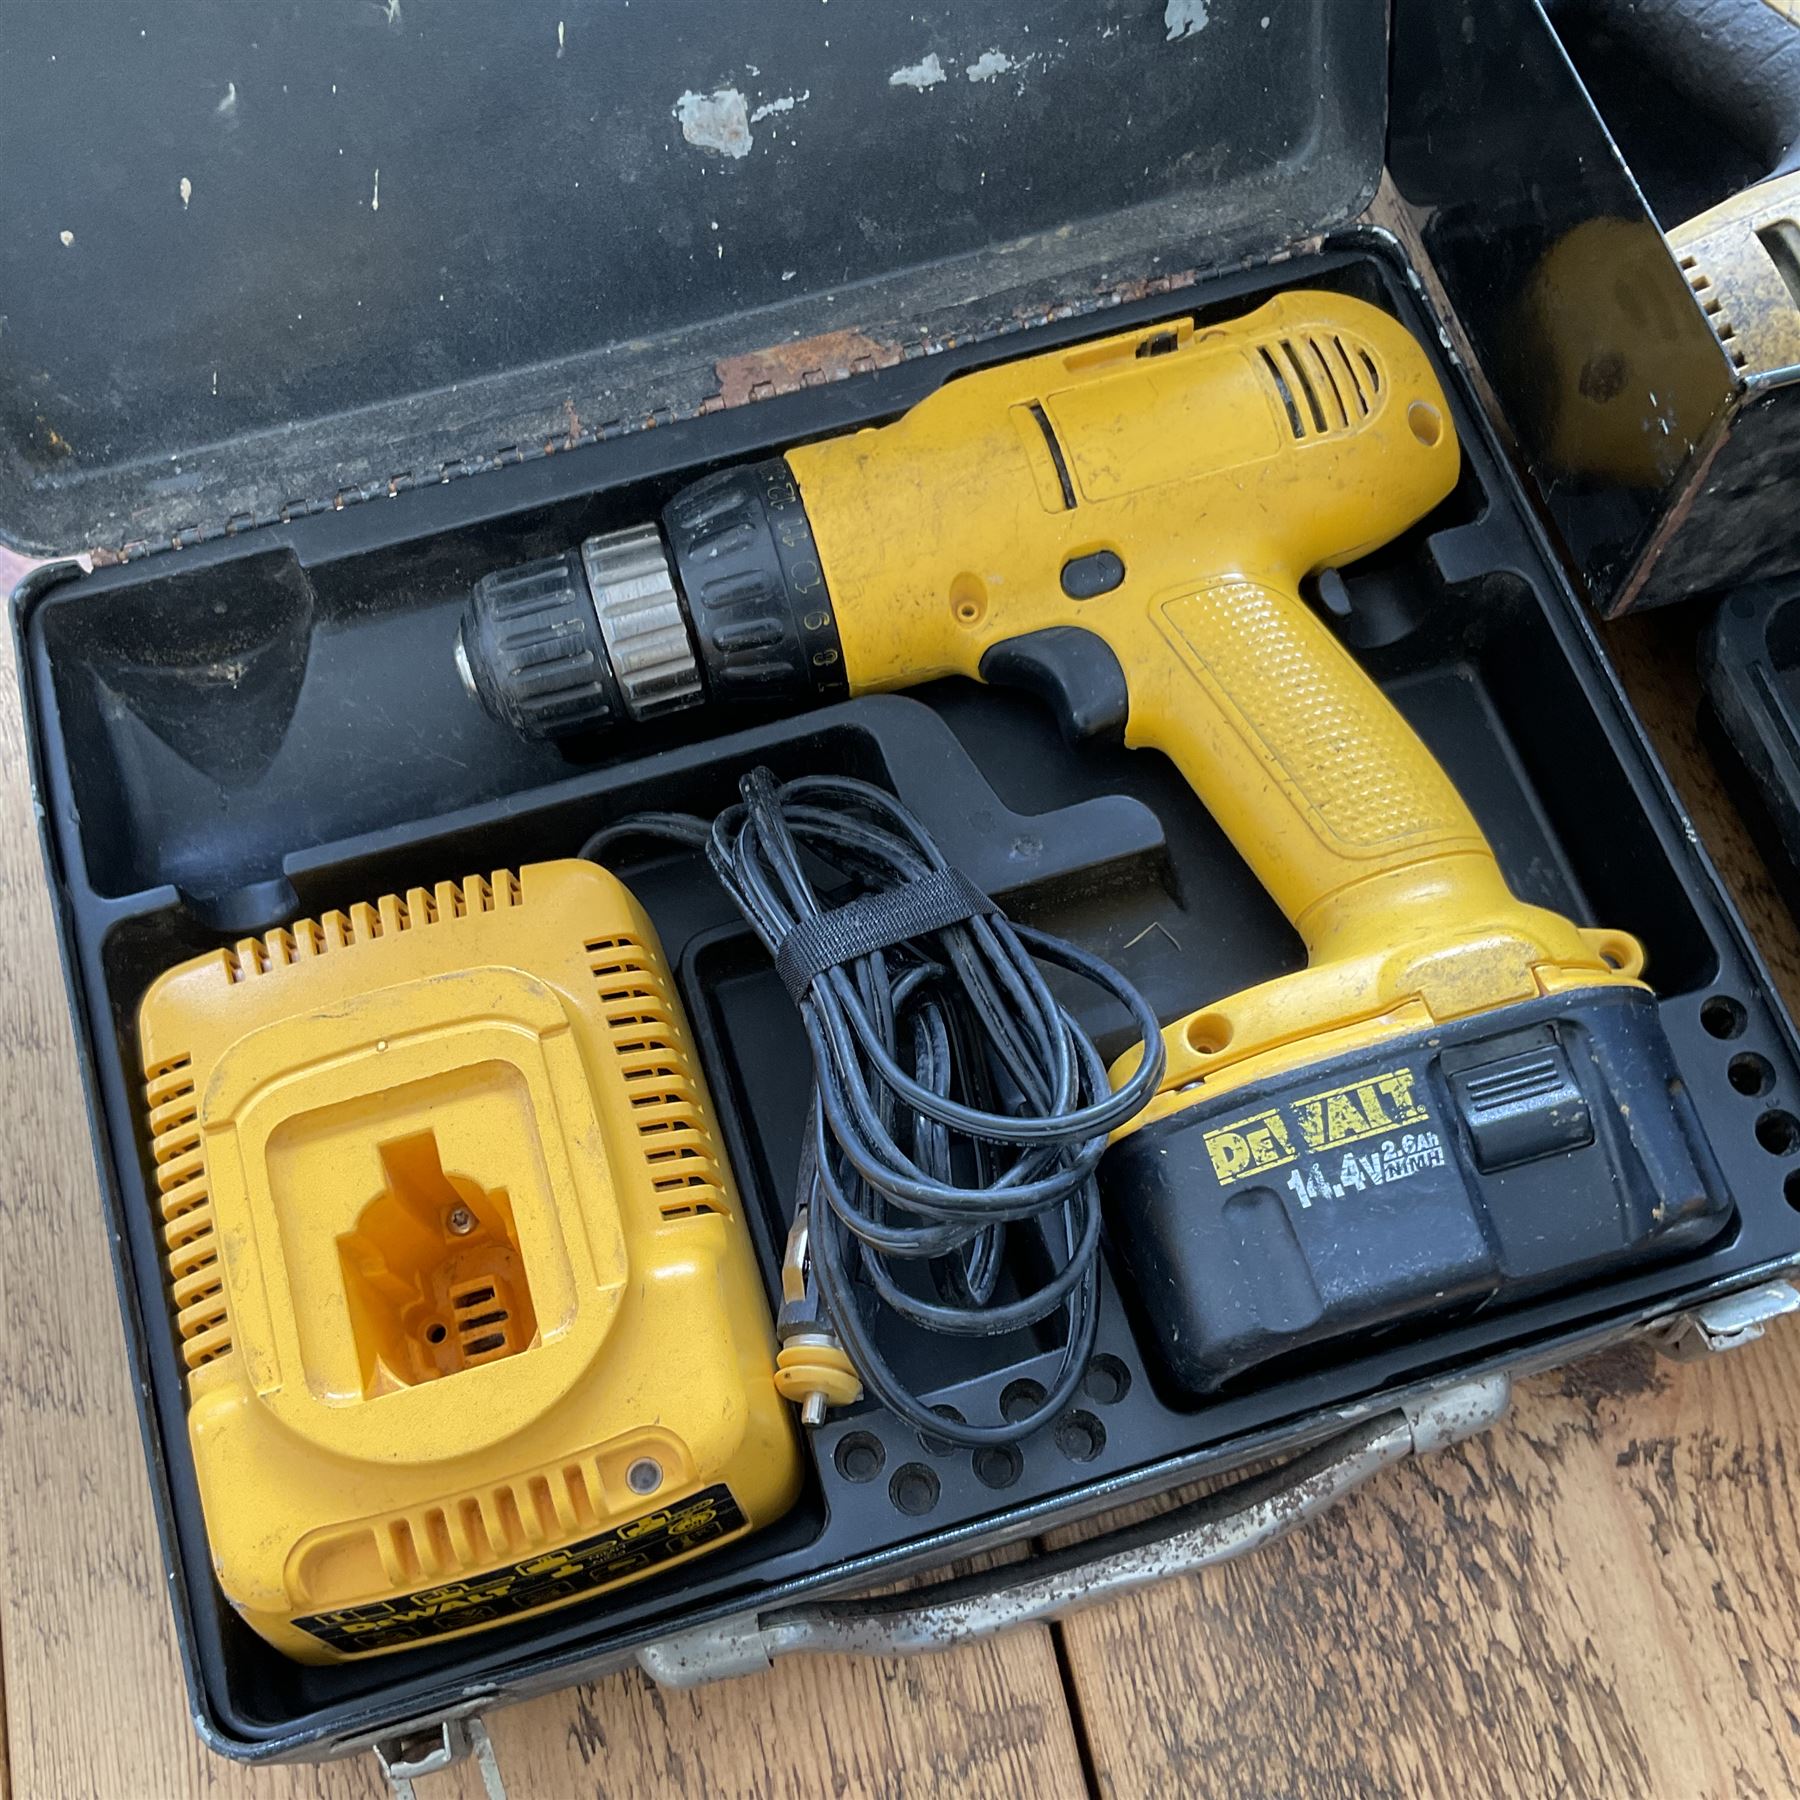 Three DeWalt battery drills with batteries and charger and black and decker corded drill - THIS LOT - Image 3 of 4